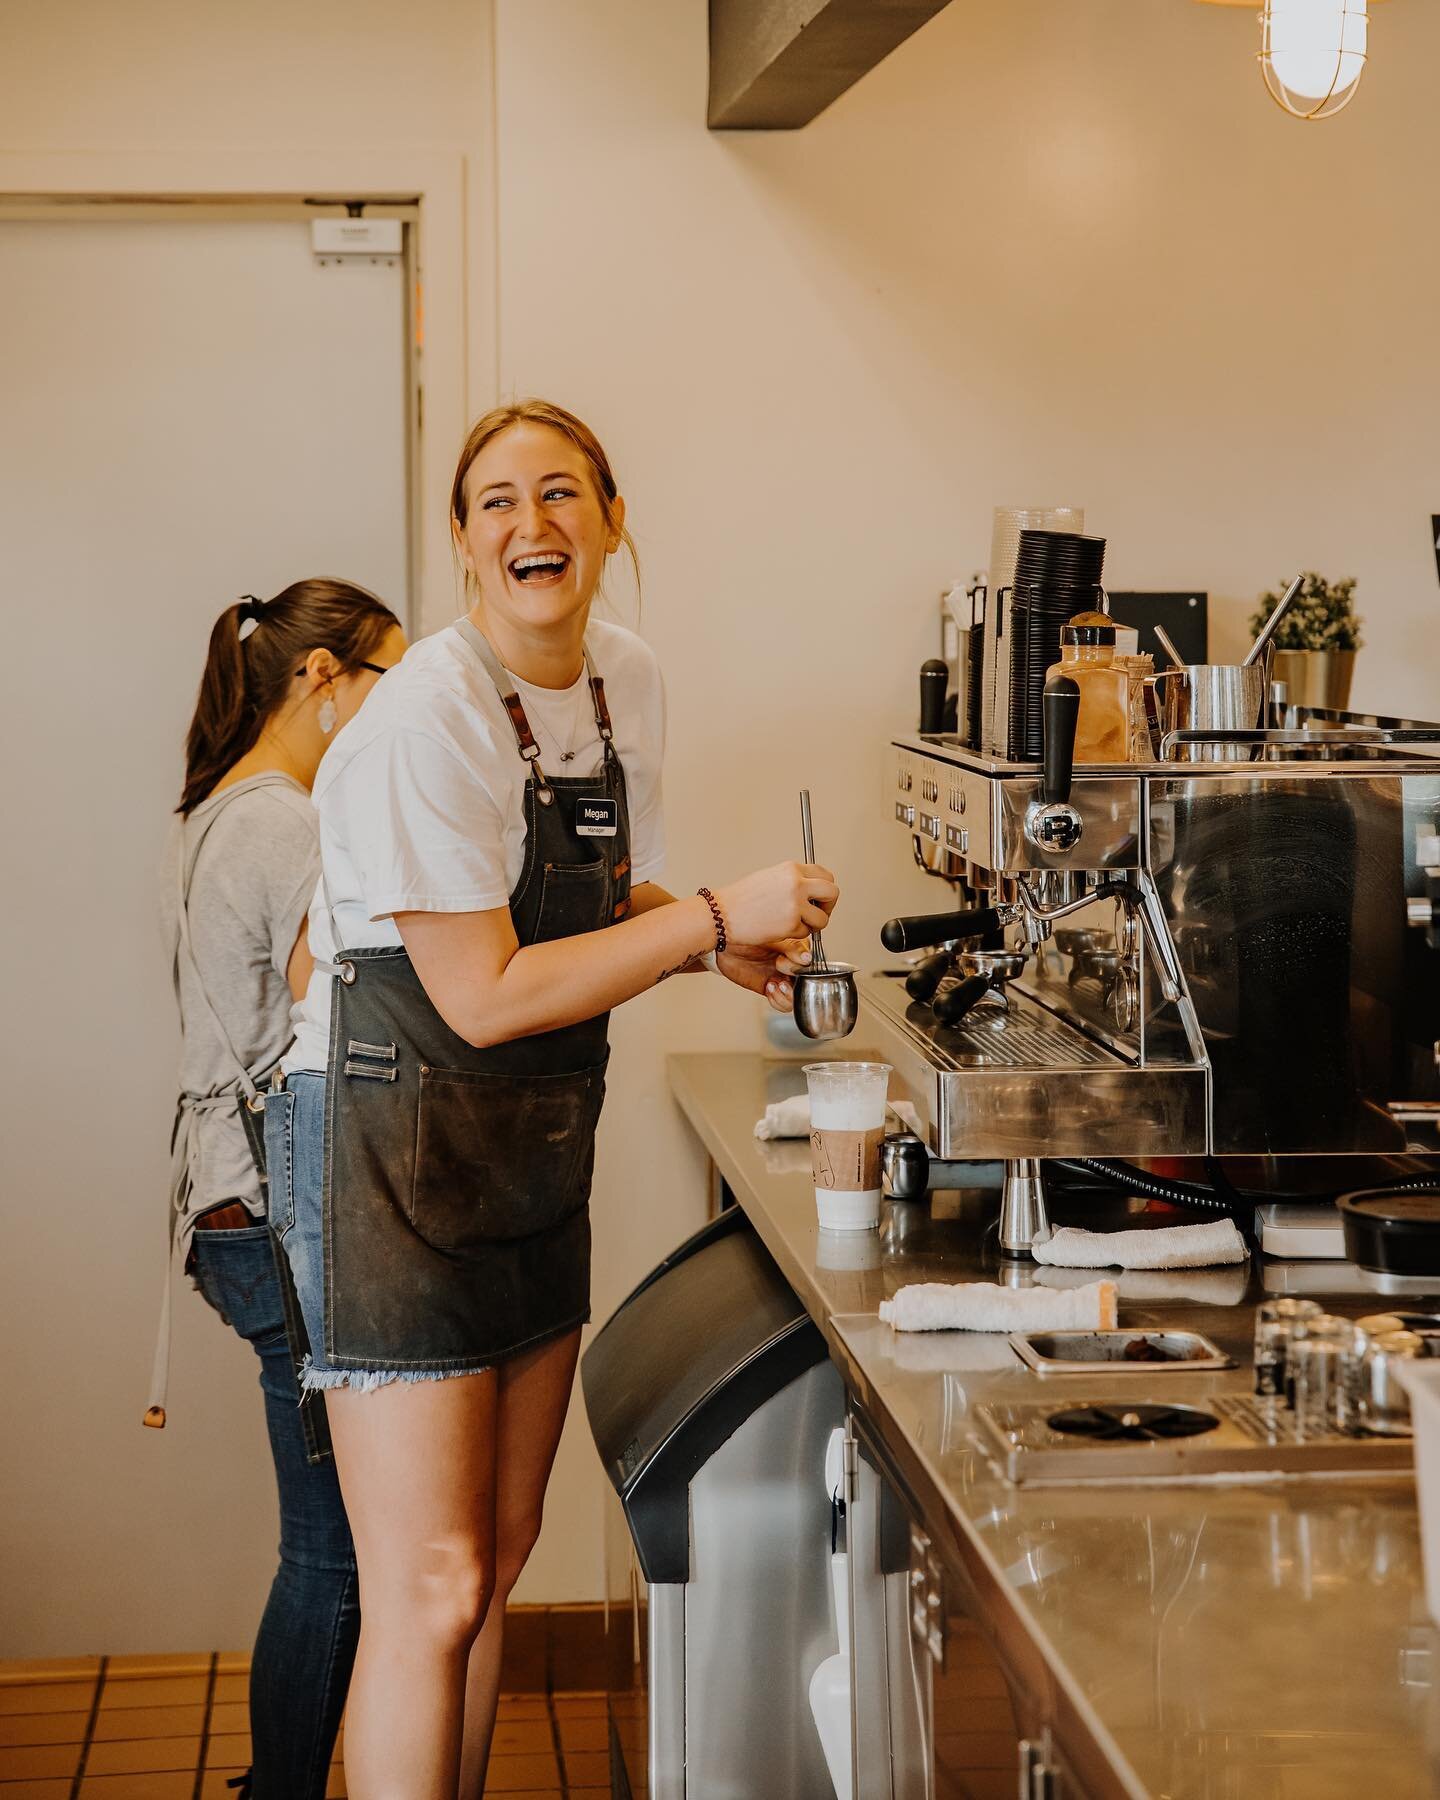 It&rsquo;s no laughing matter that we are closing early tomorrow!!! We will be shutting down the shop at 11:00 to have some routine maintenance done on our espresso machine!!! Not to worry though, it should be wrapped up tomorrow, so regular business